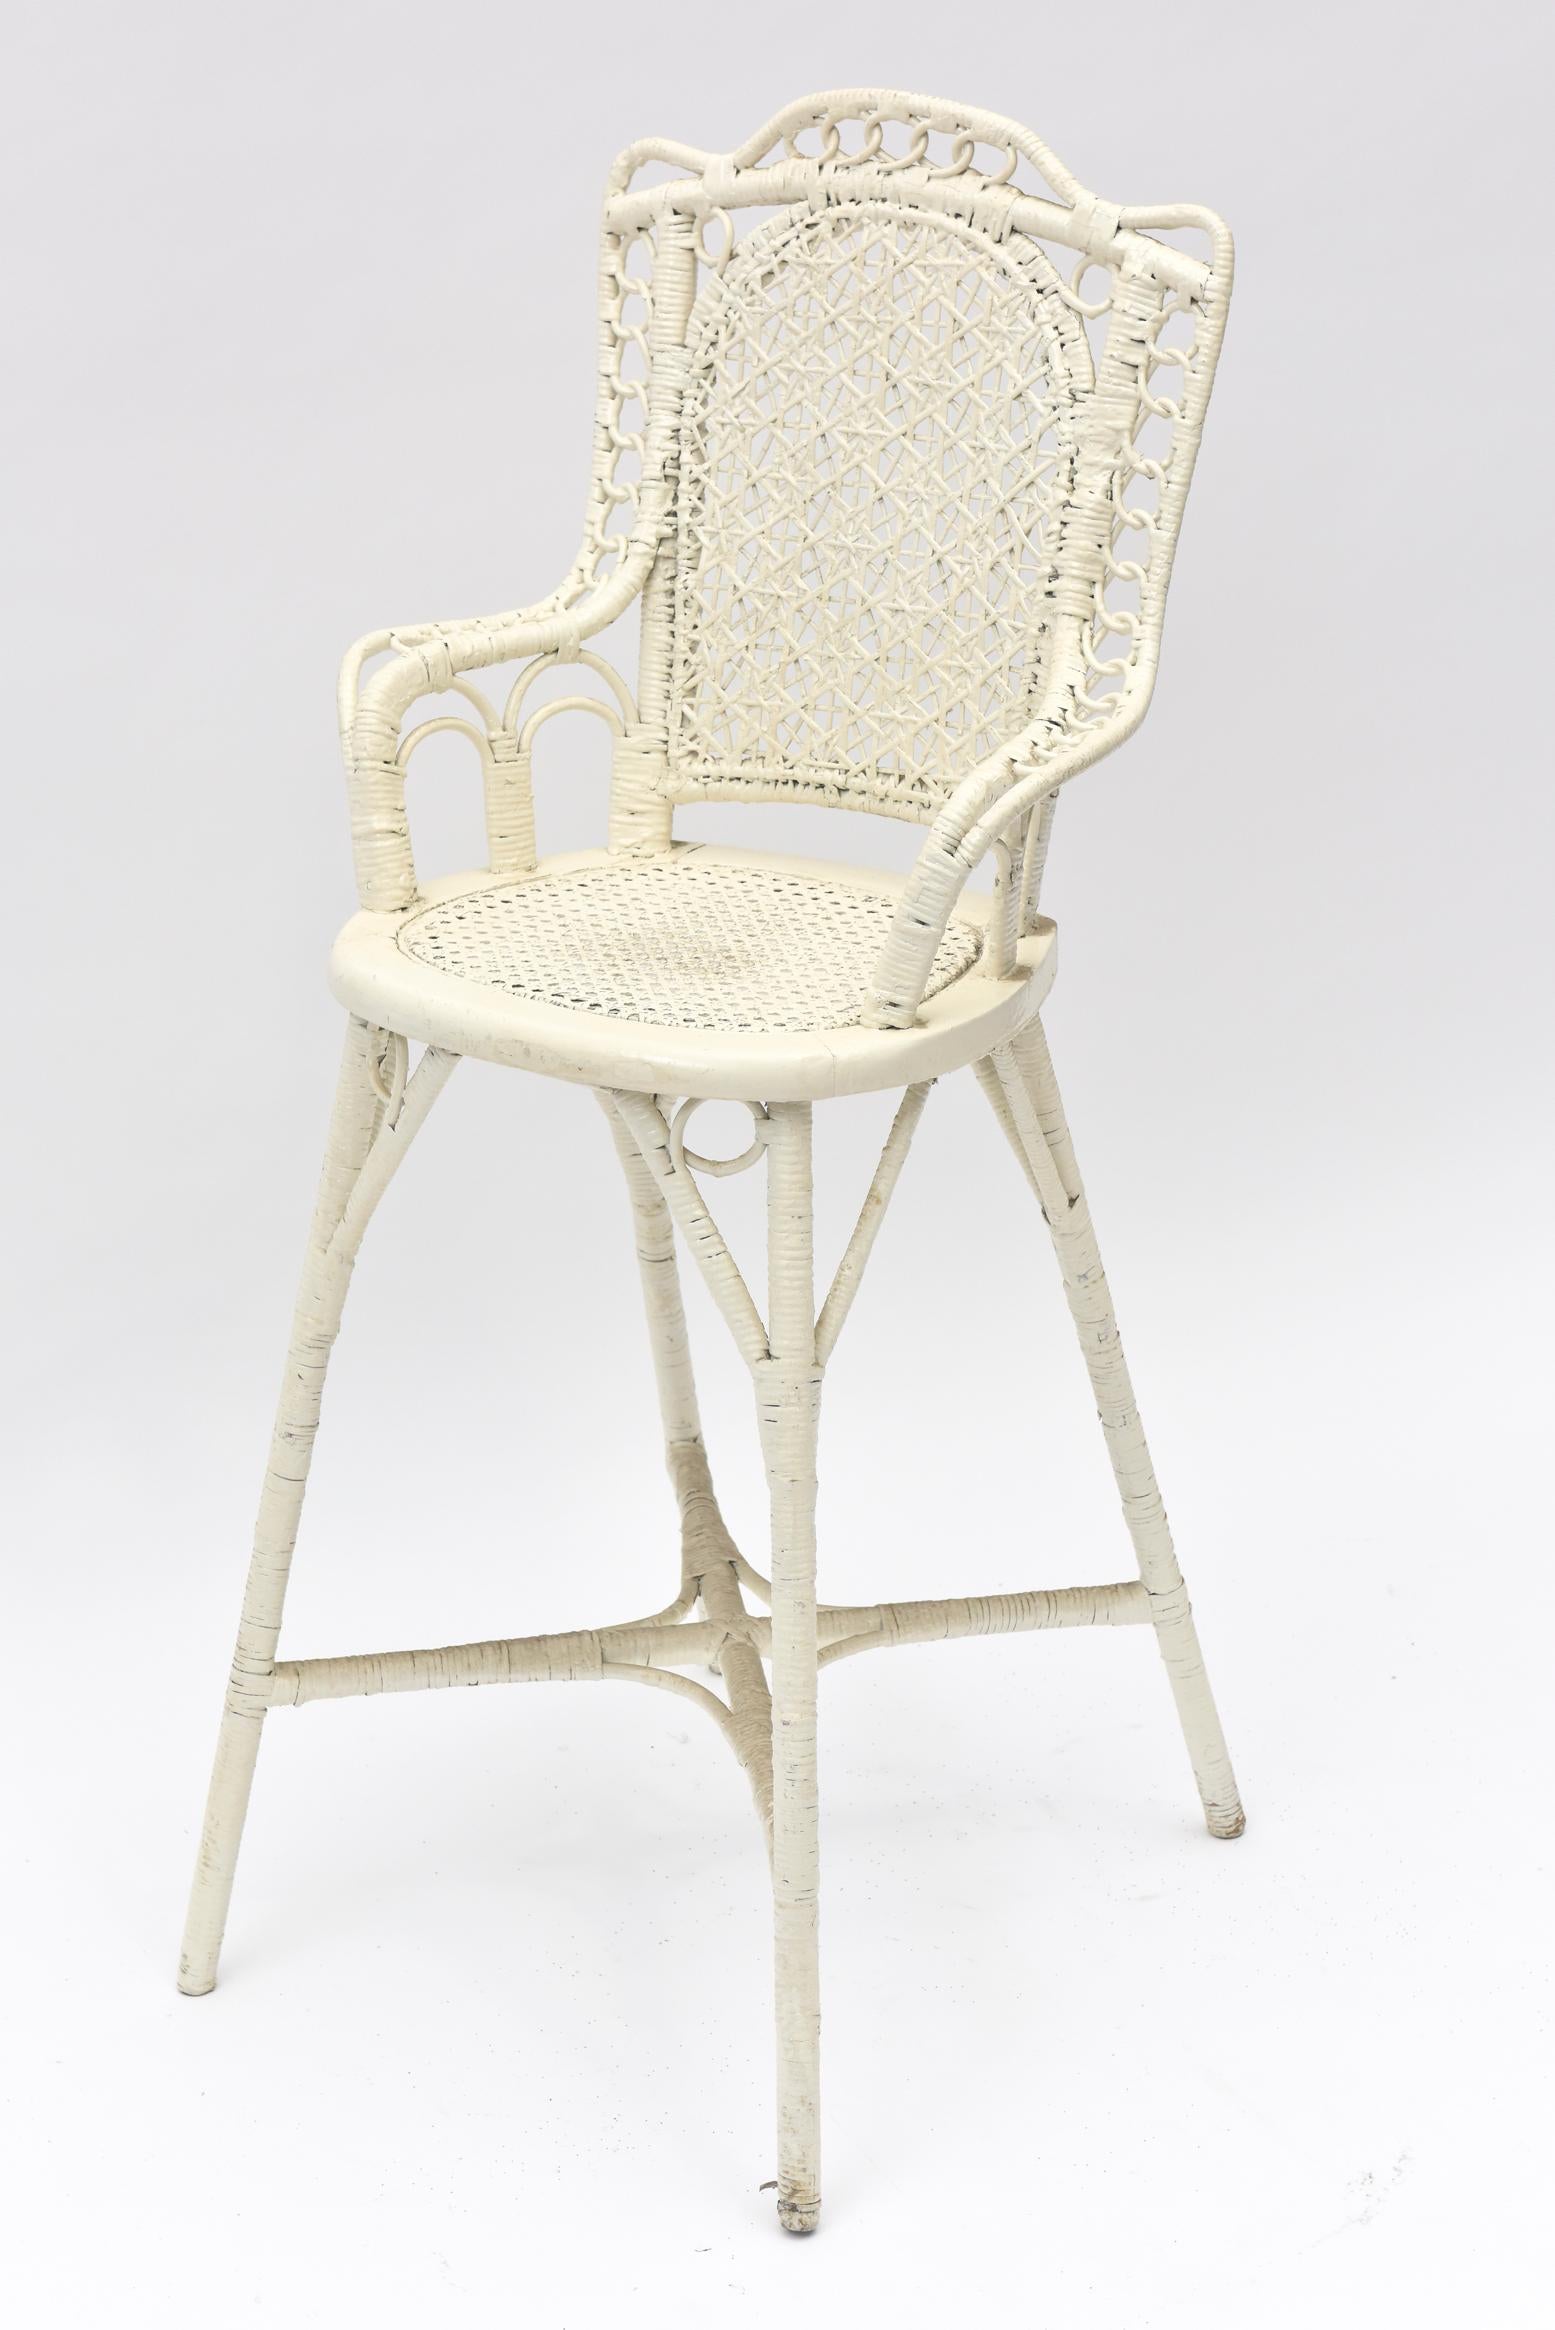 white vintage high chair for sale